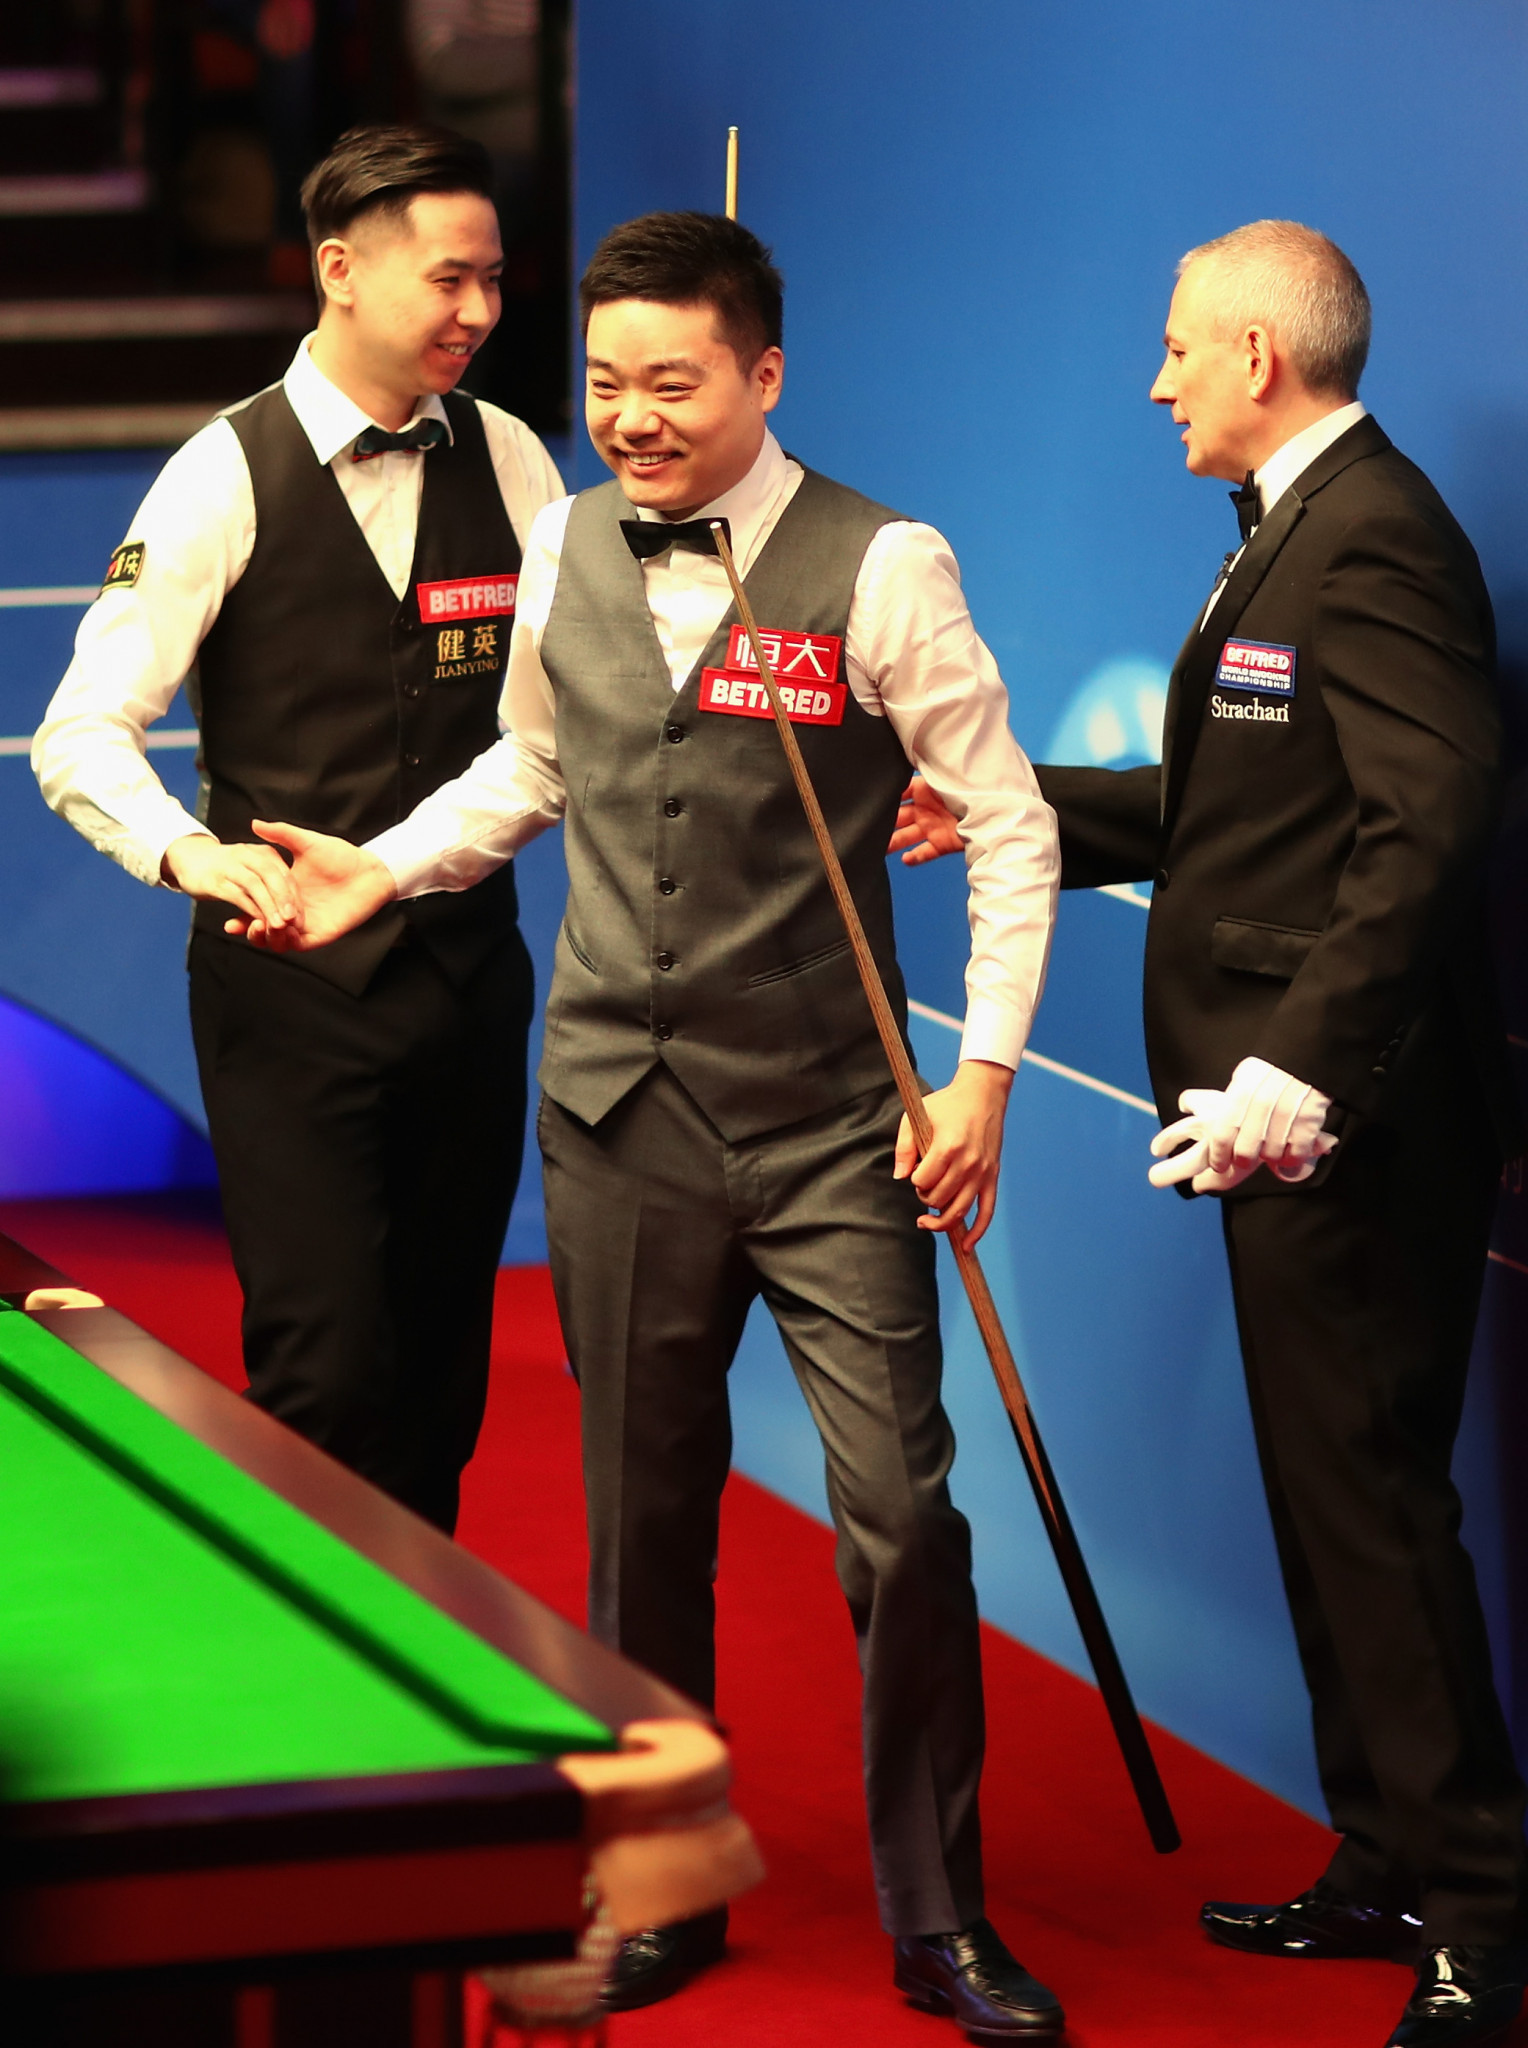 China’s Ding Junhui stormed to a 10-3 win over compatriot Xiao Guodong to secure his place in the last-16 of the World Snooker Championships in Sheffield ©Getty Images